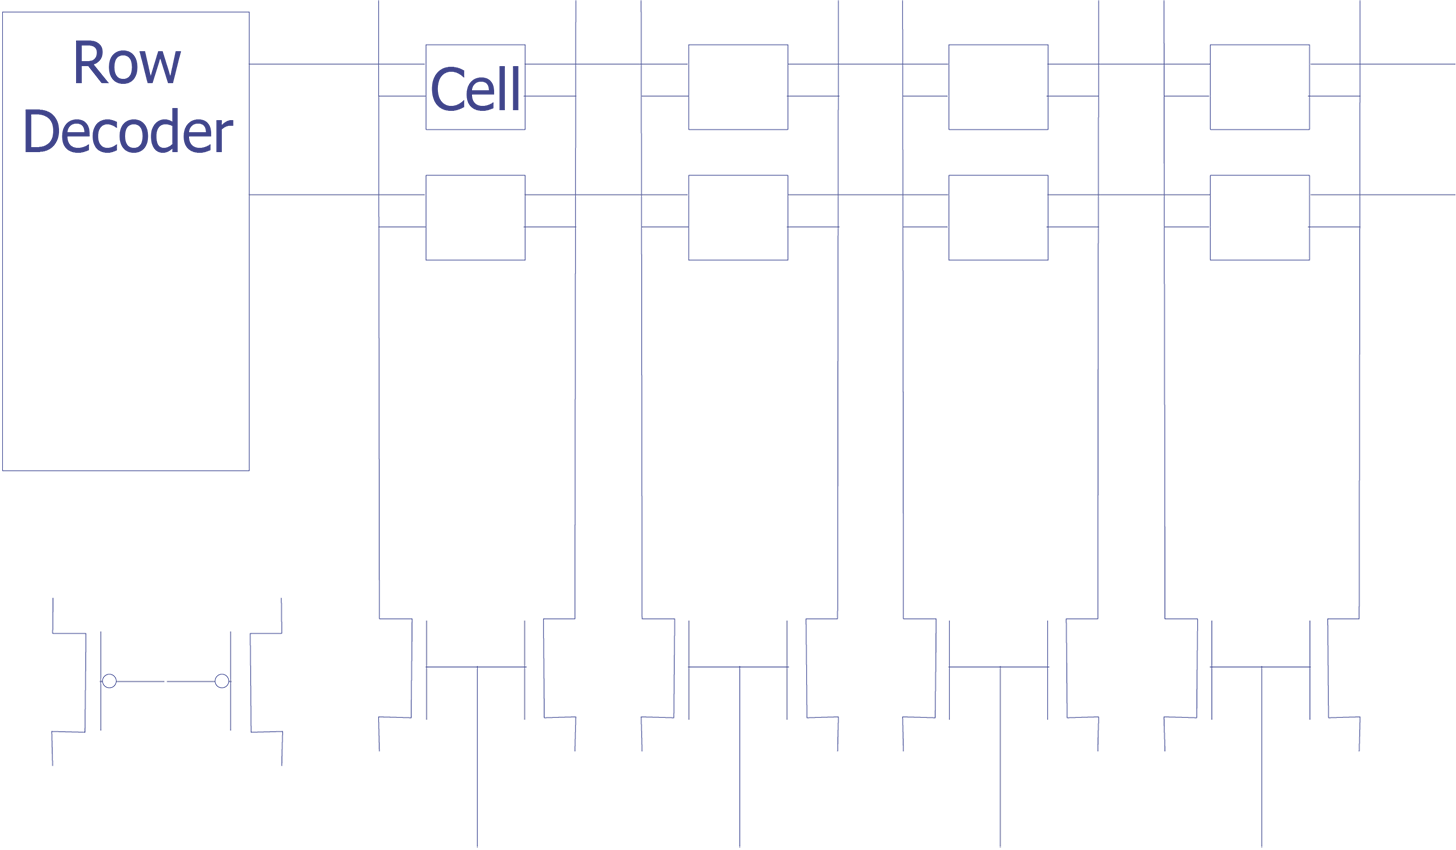 Schematic of a dynamic random access memory cell (after Singh).